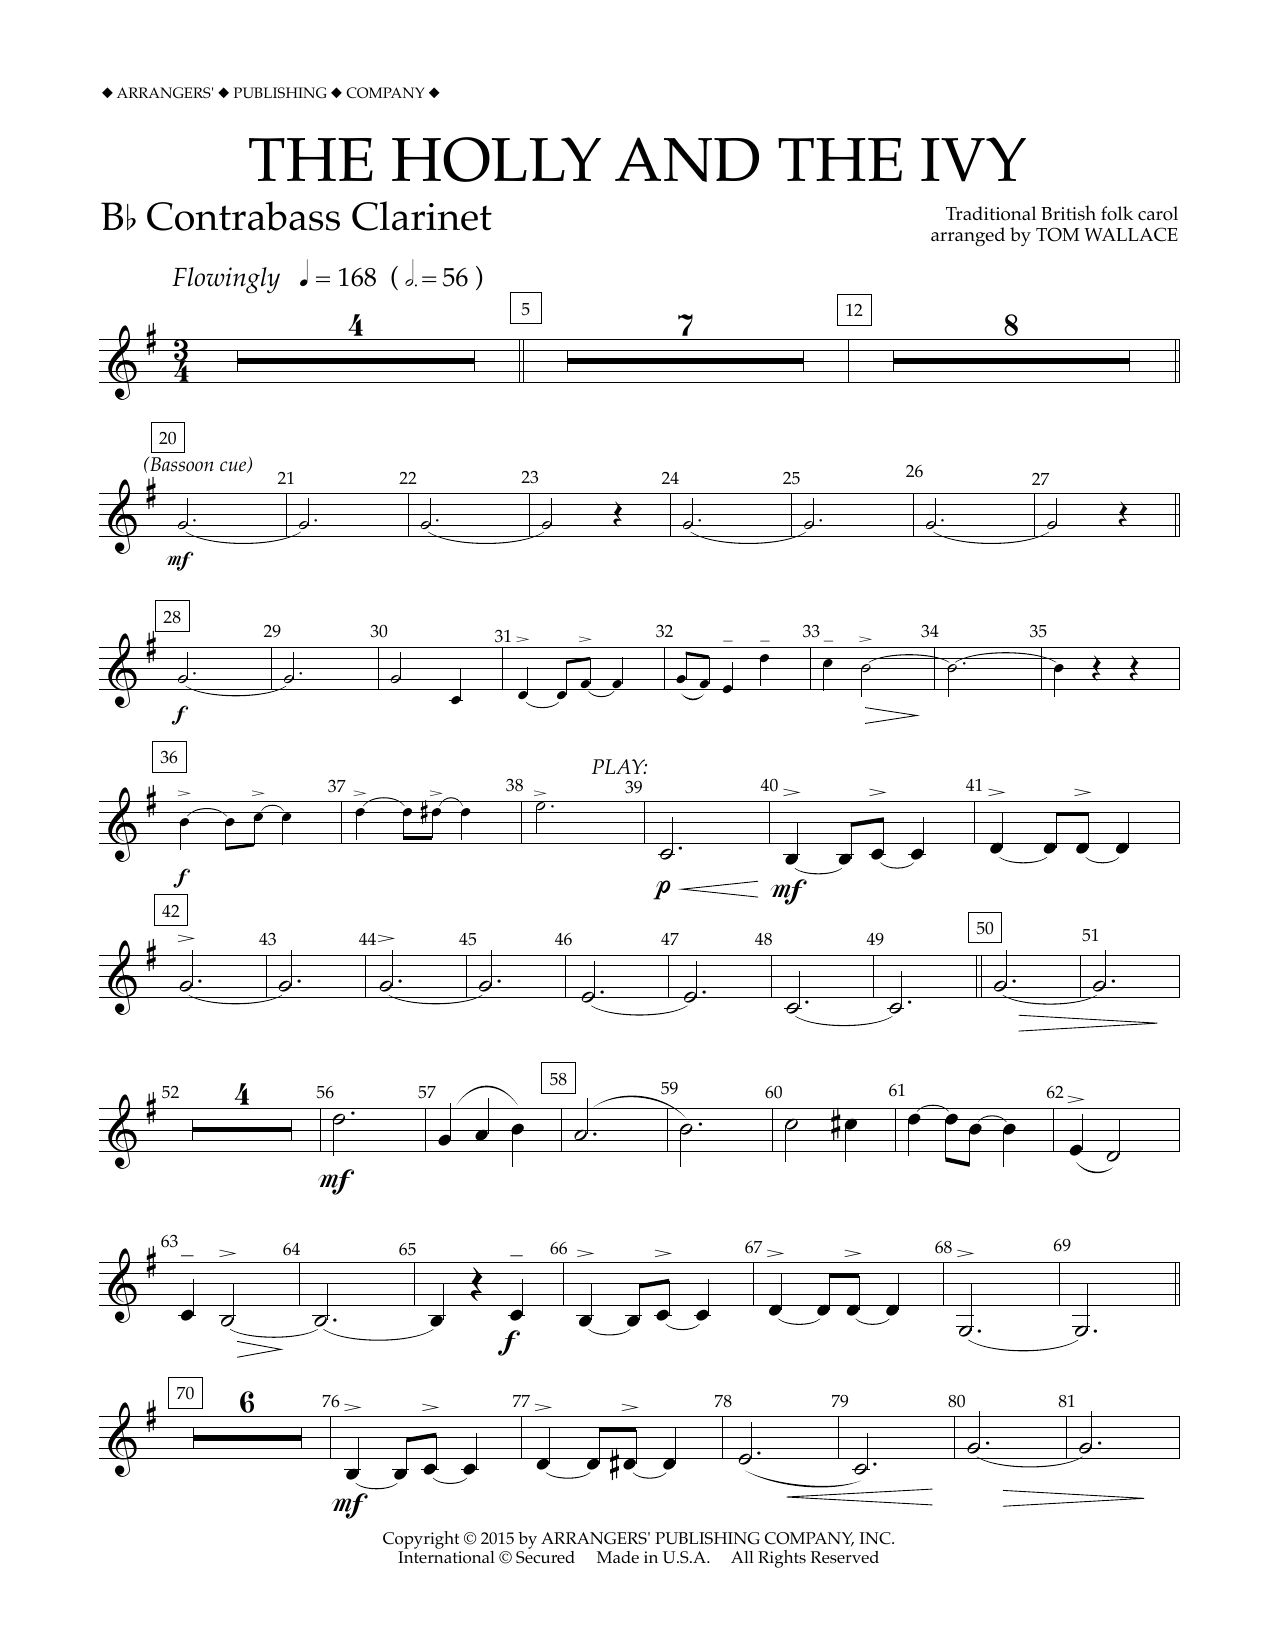 Download Tom Wallace The Holly and the Ivy - Bb Contrabass C Sheet Music